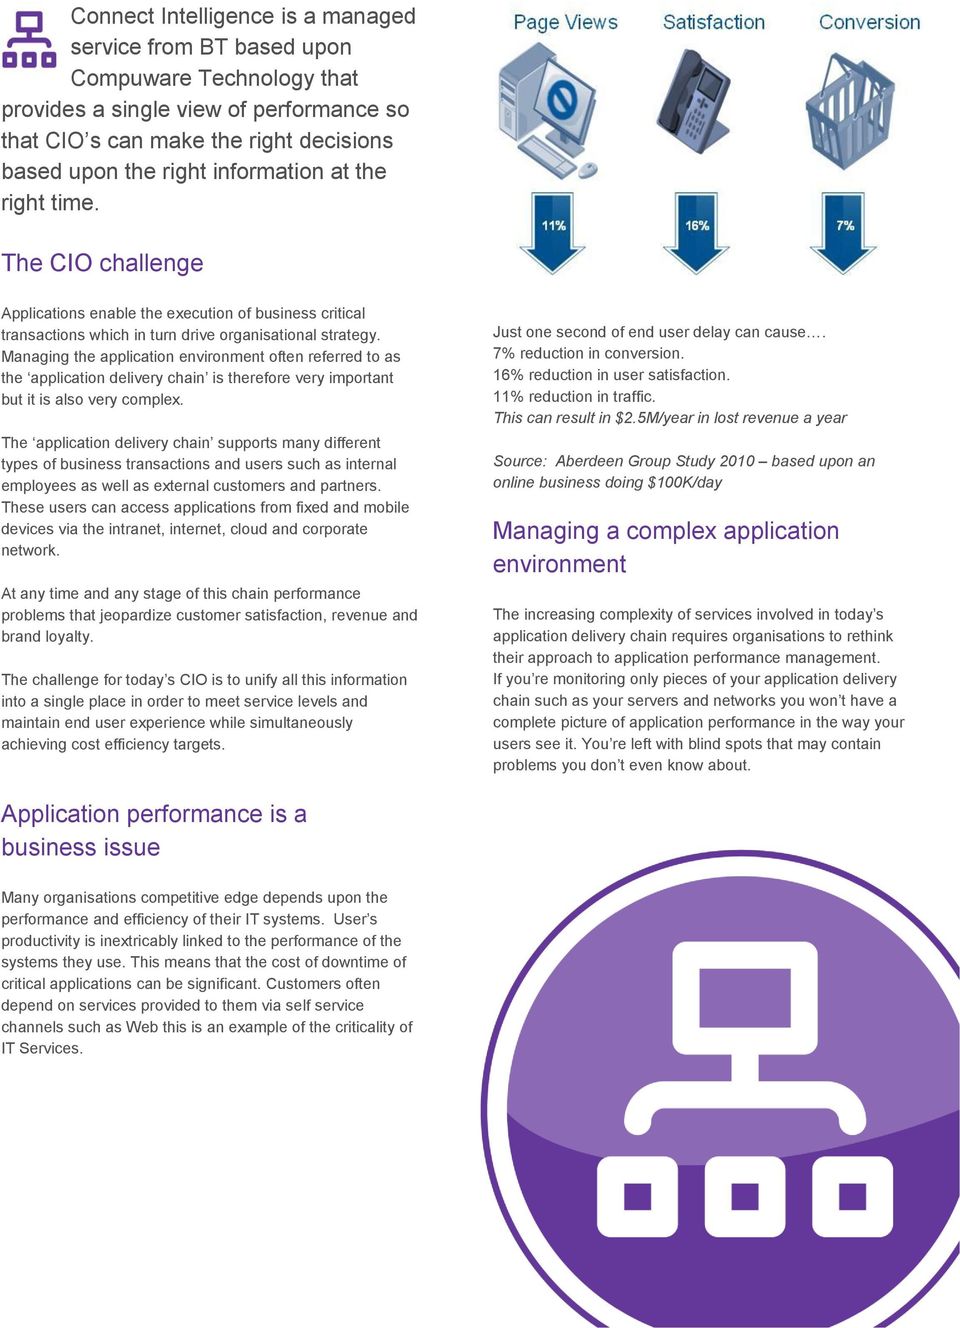 Managing the application environment often referred to as the application delivery chain is therefore very important but it is also very complex.